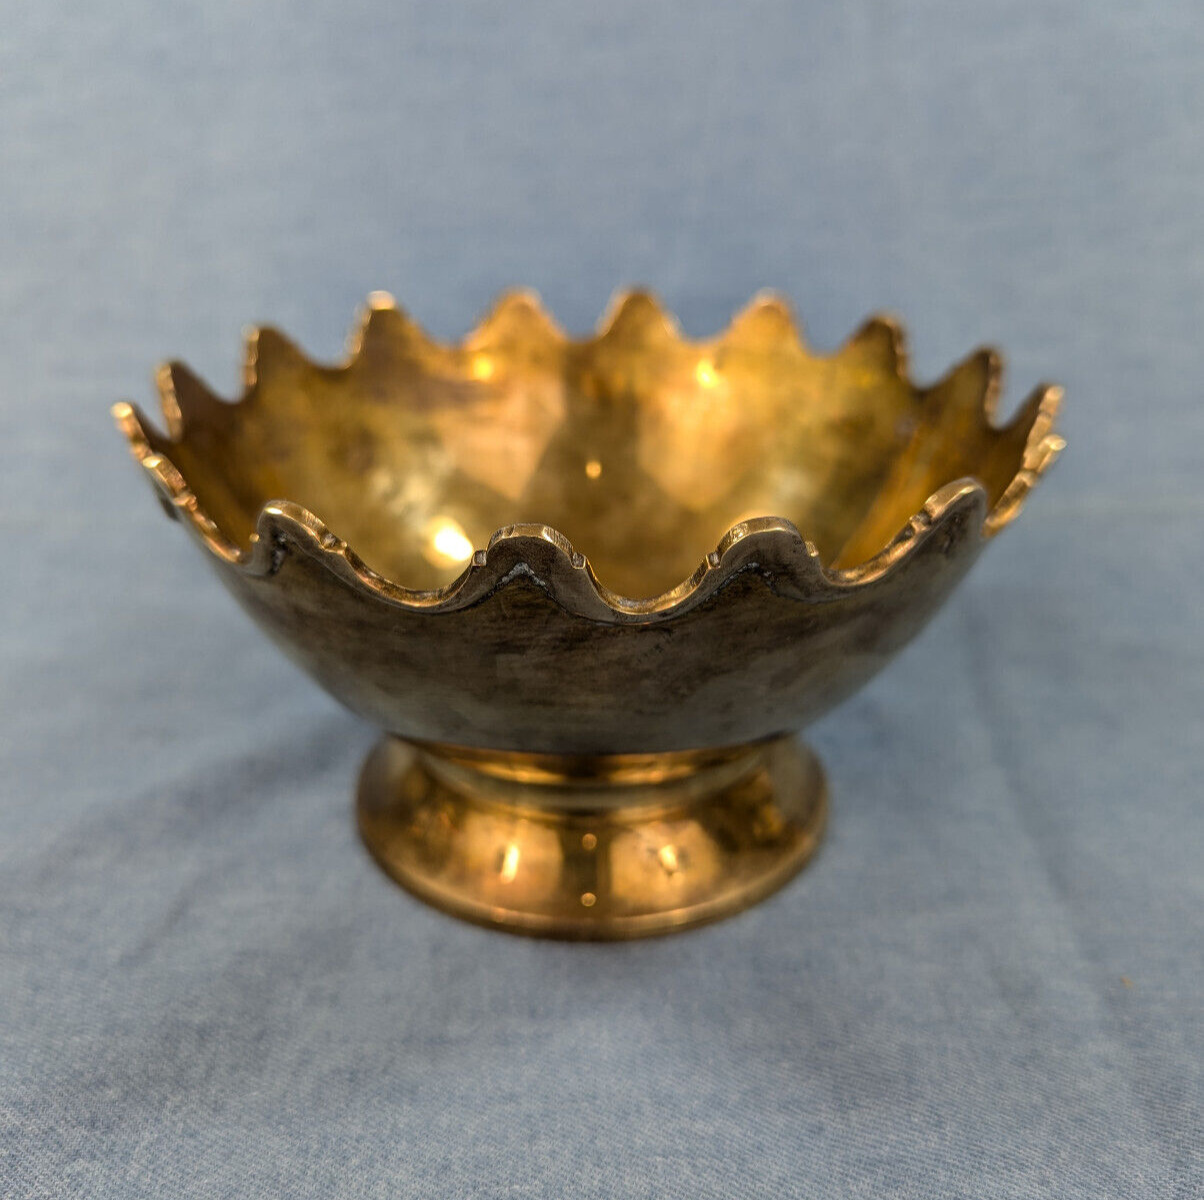 Vintage brass scalloped rim crown bowl, footed bowl/compote, est 1940-60s